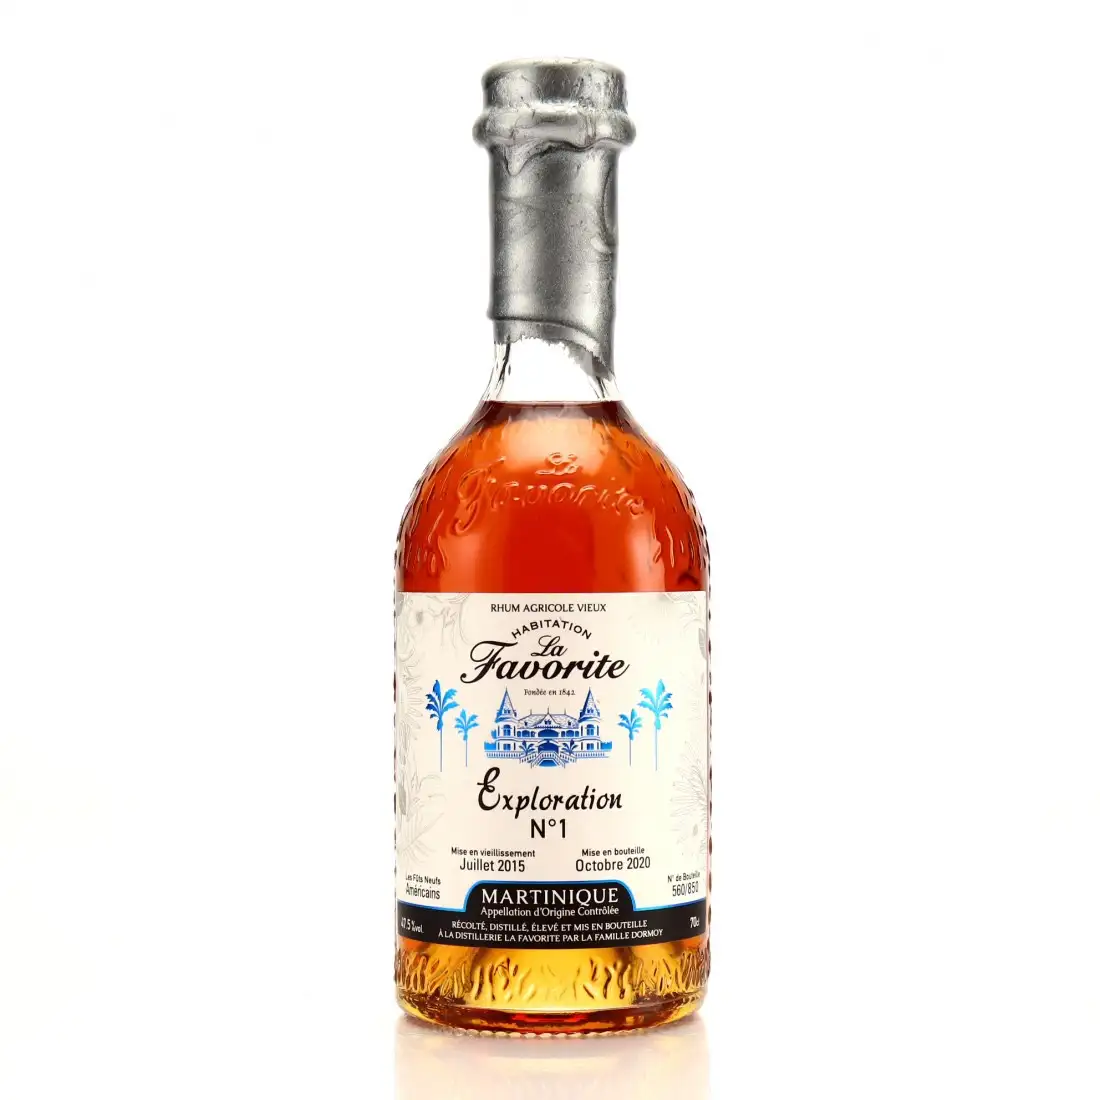 Image of the front of the bottle of the rum Exploration N°1